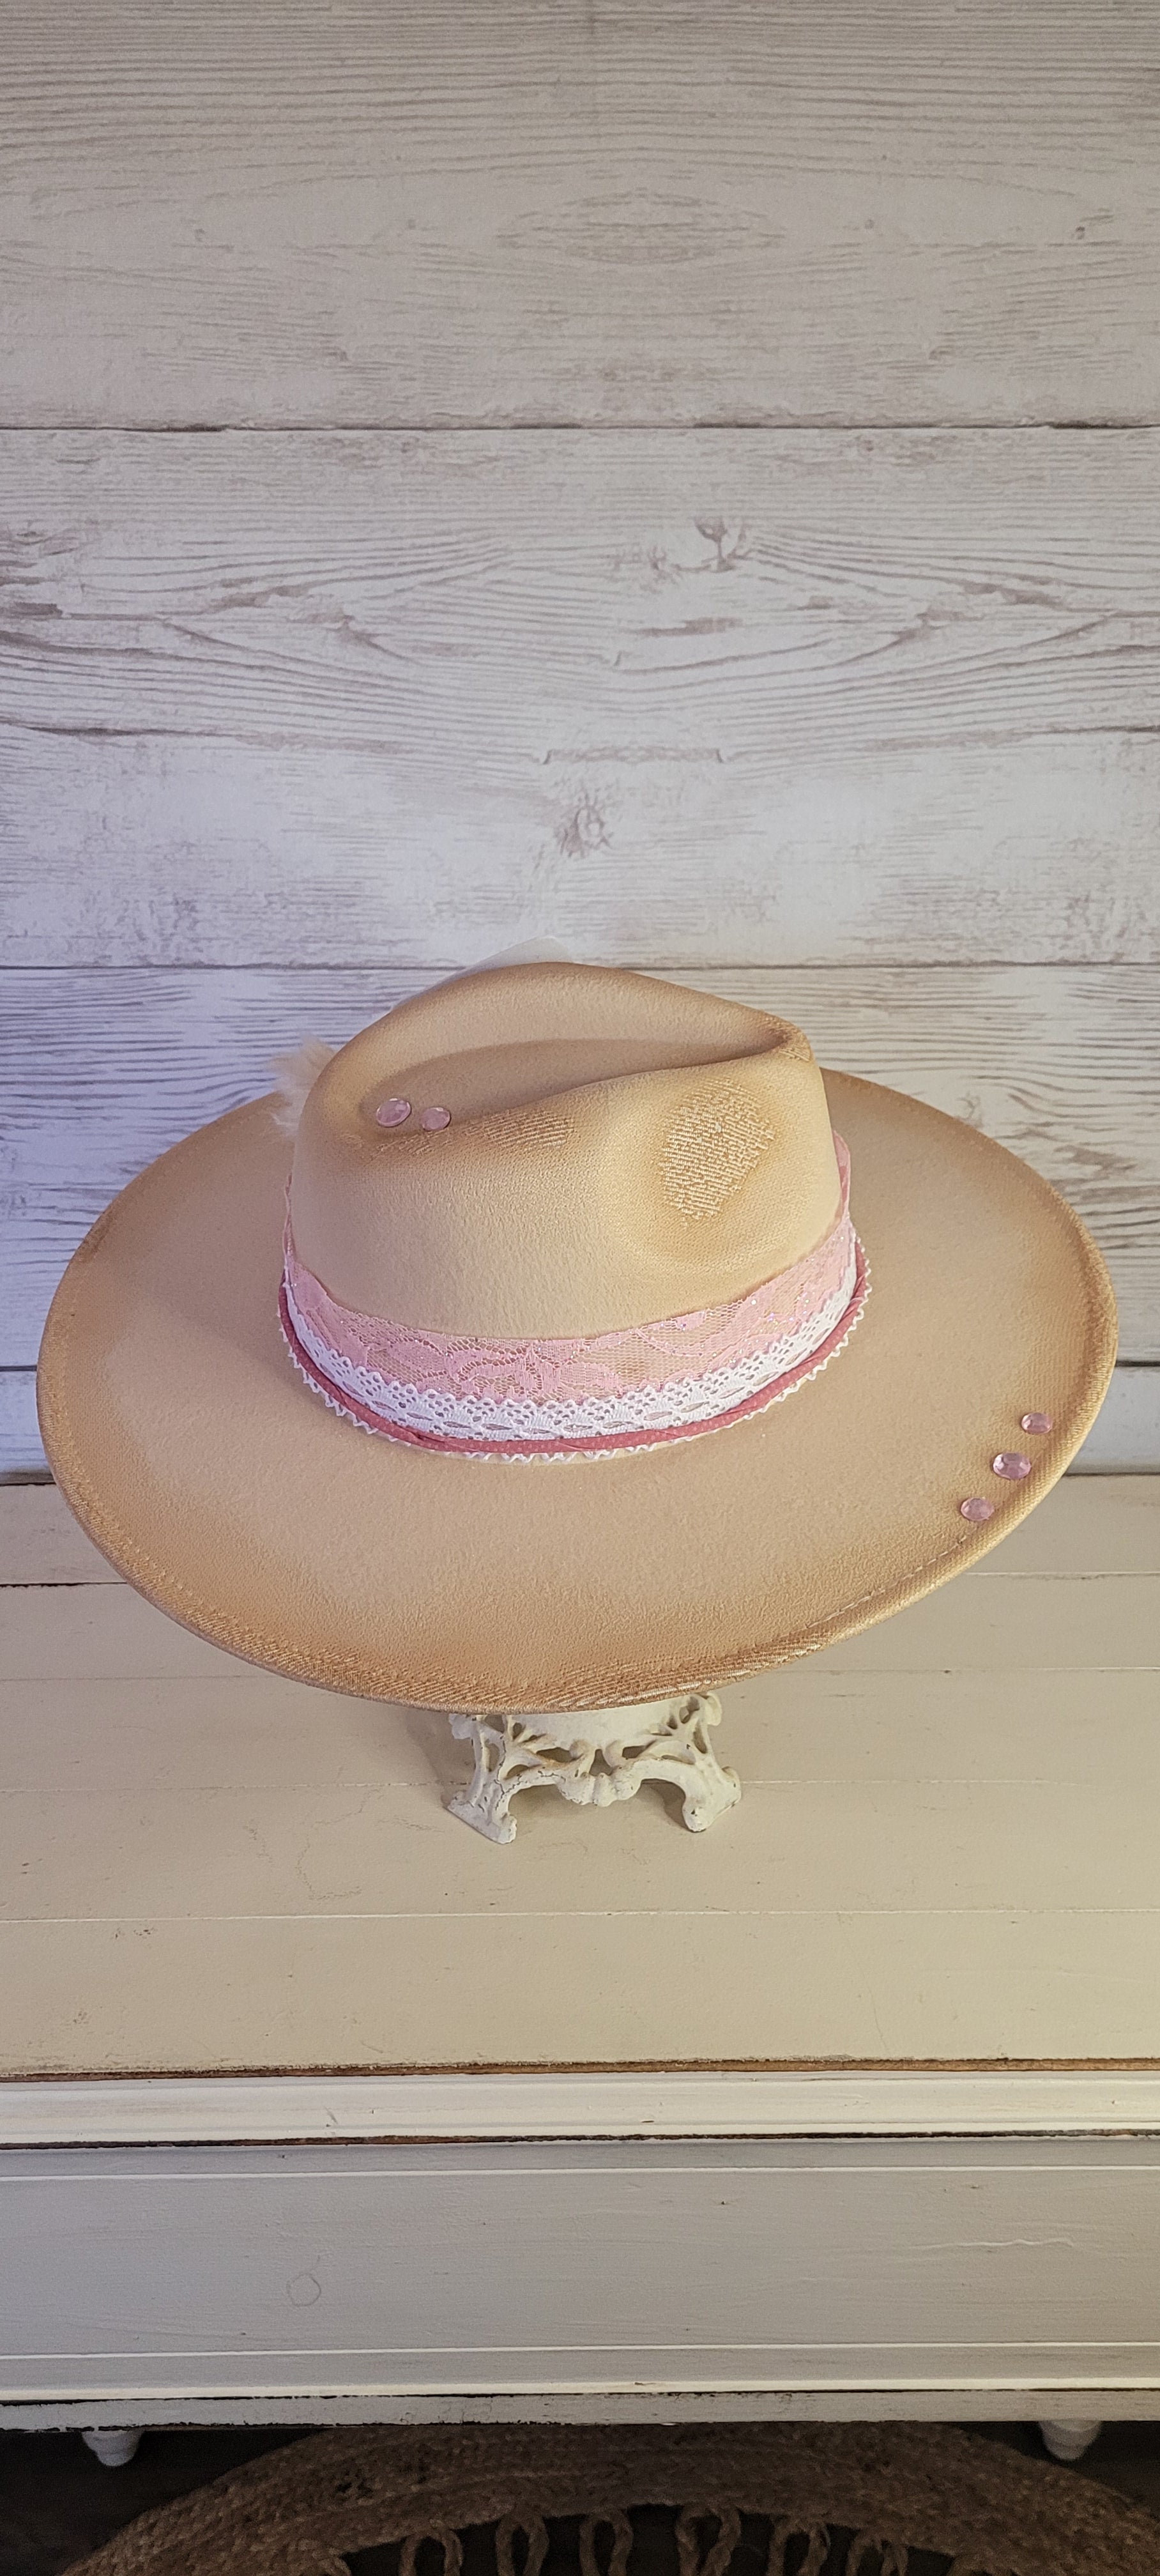 Pink ribbon & lace, natural lace ribbon, pampas, AB rhinestone brooch, light pink rhinestones & playing card Felt hat Flat brim 65% polyester and 35% cotton Ribbon drawstring for hat size adjustment Head Circumference: 24" Crown Height: 5" Brim Length: 15.75" Brim Width: 14.5" Branded & numbered inside crown Custom burned & designed by Kayla